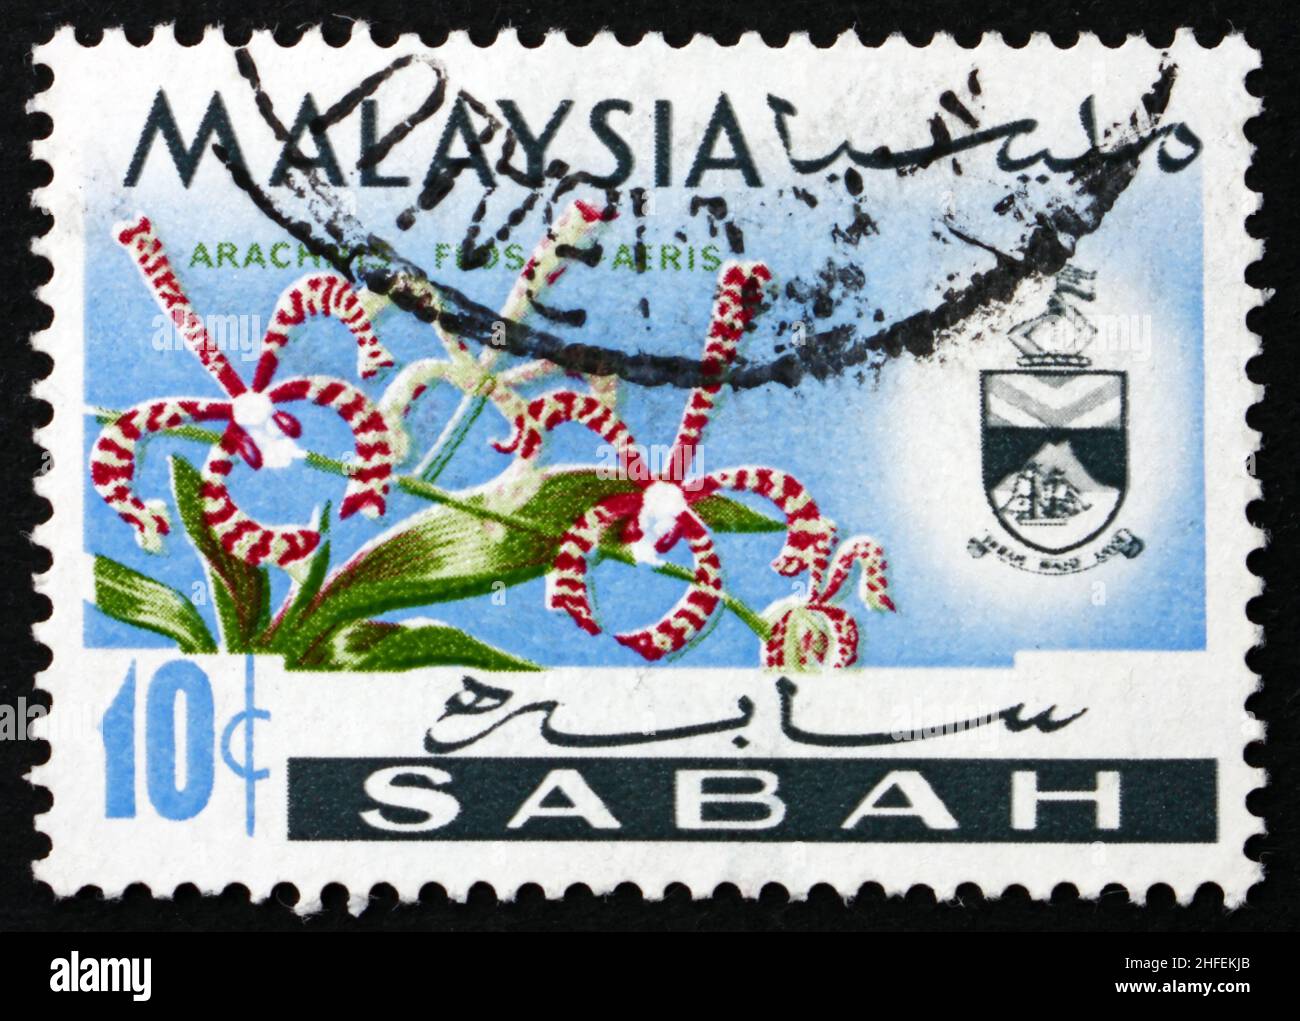 MALAYSIA - CIRCA 1965: a stamp printed in Malaysia shows Arachnis Flosaeris, Orchid Flower, circa 1965 Stock Photo